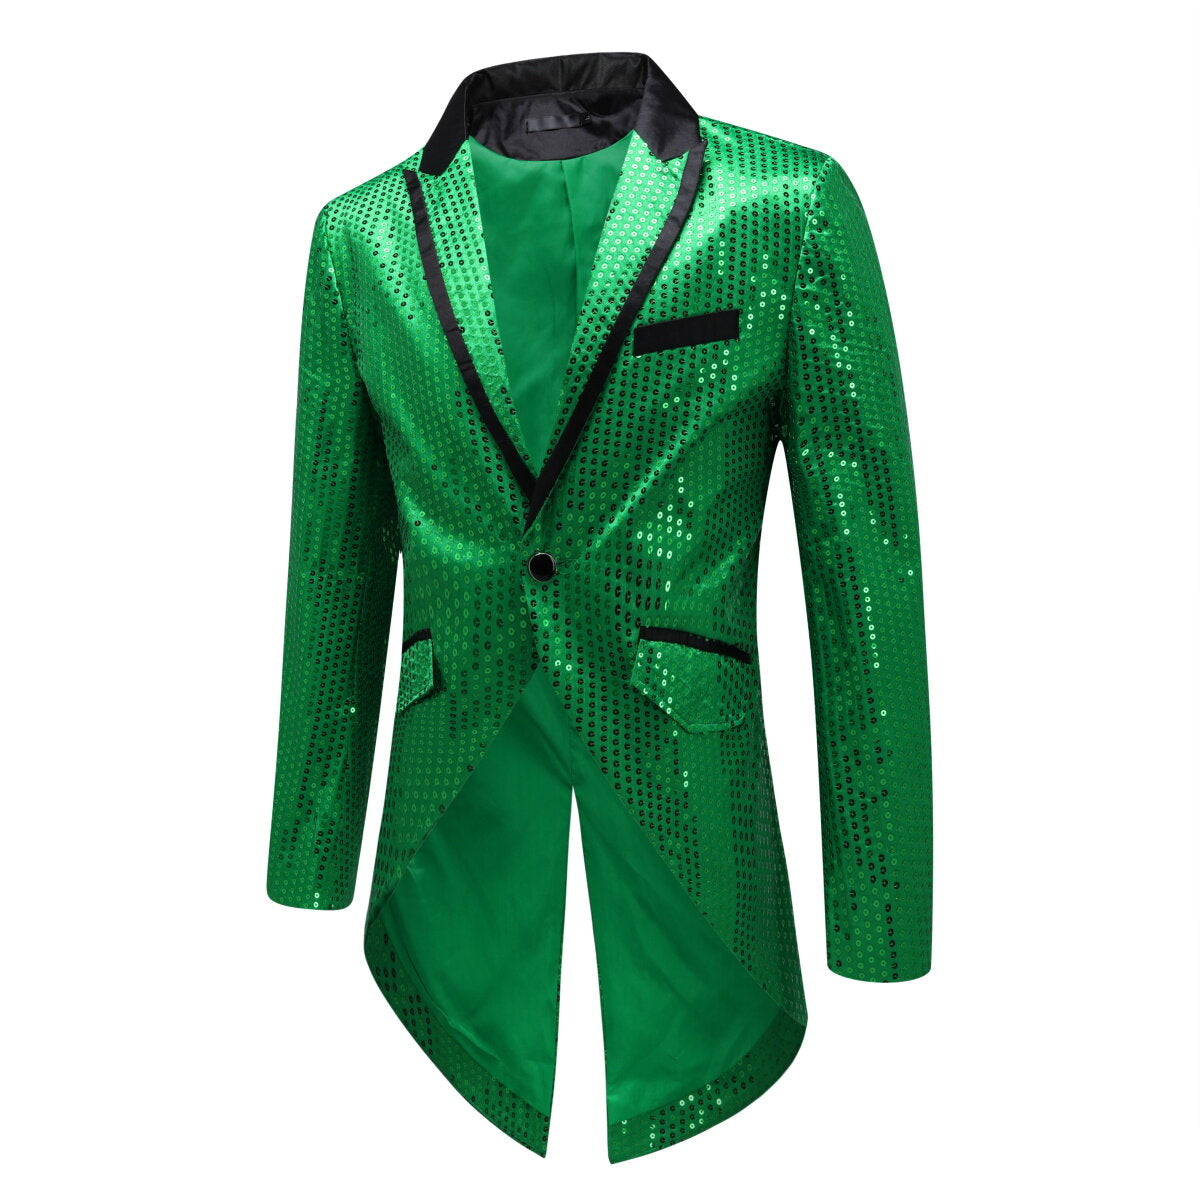 Green Sequin Decorated Swallowtail Coat